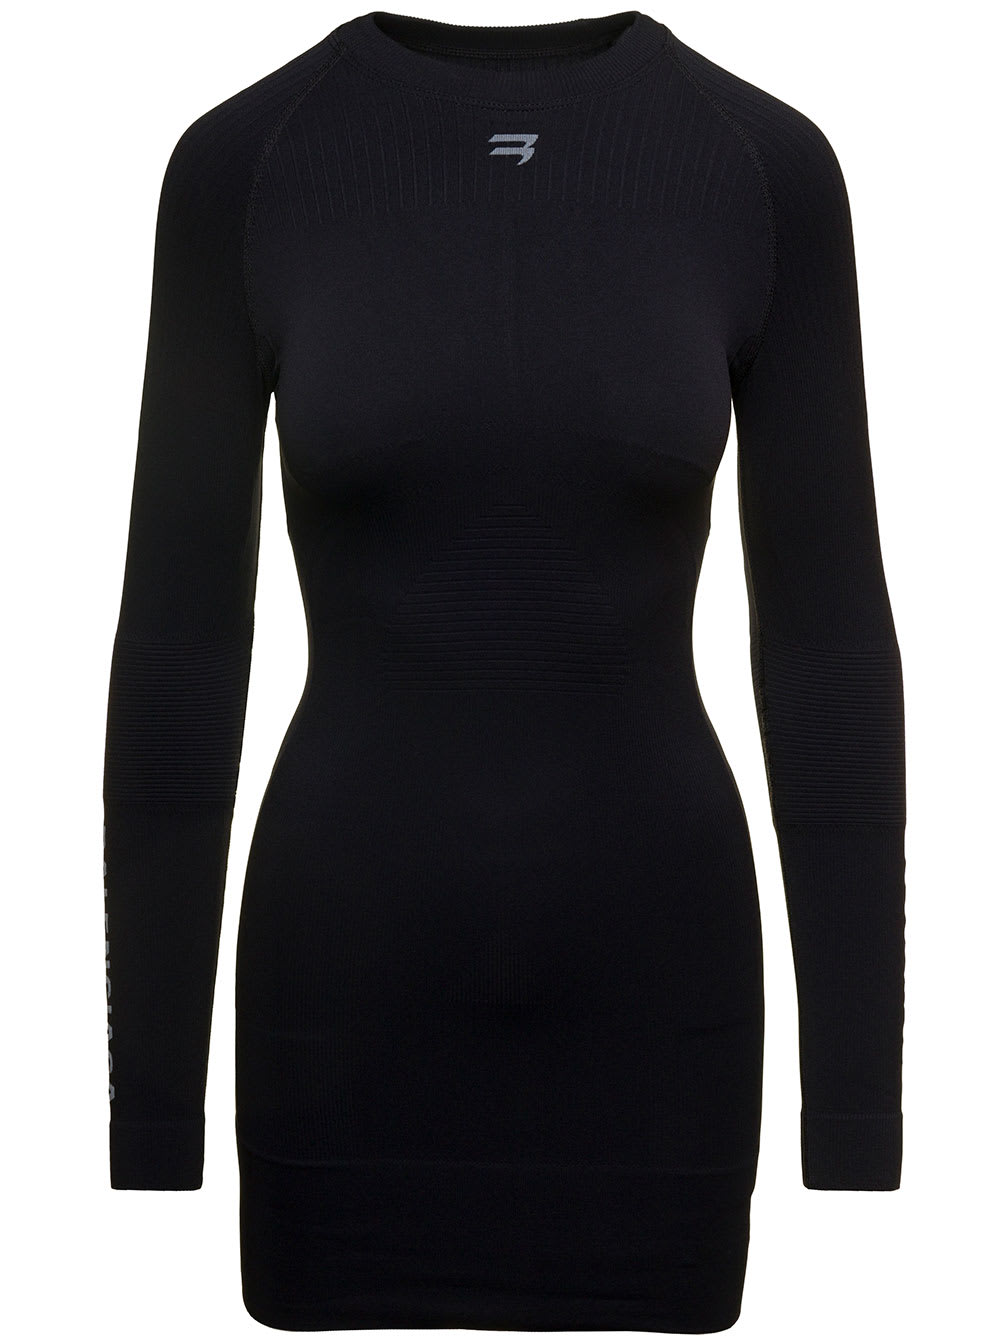 BALENCIAGA MINI TIGHT BLACK DRESS WITH CONTRASTING LOGO PRINT AT THE FRONT IN STRETCH POLYAMIDE WOMAN